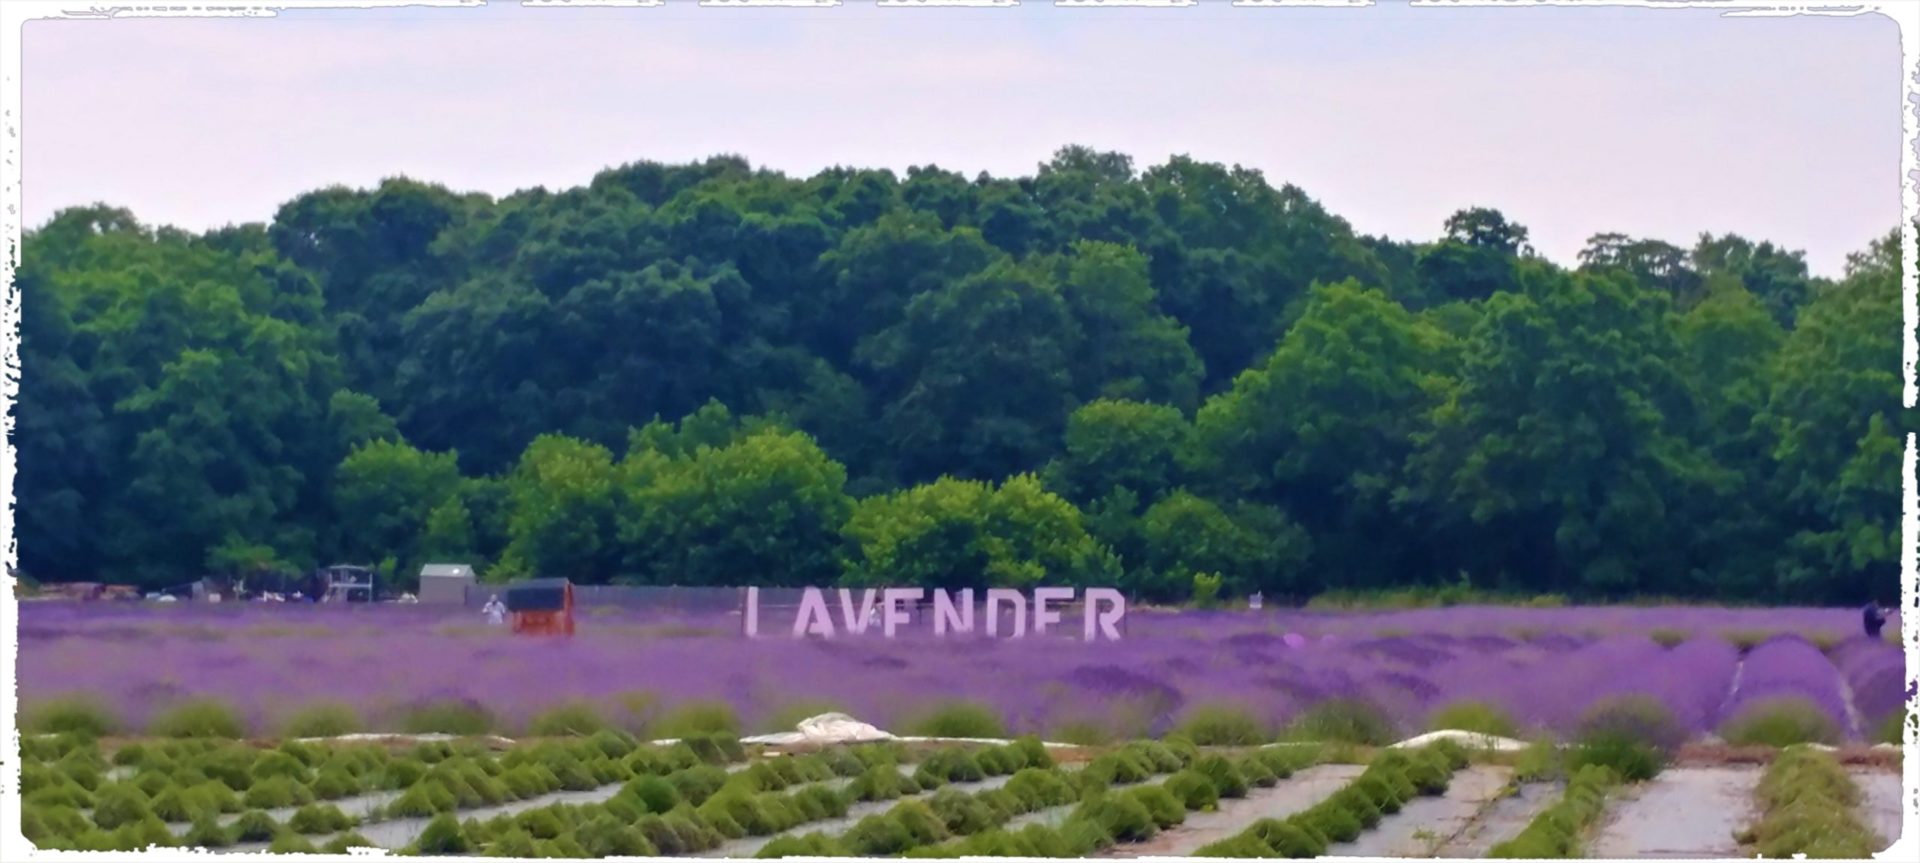 Find family fun at Lavender by the Bay, East Marion